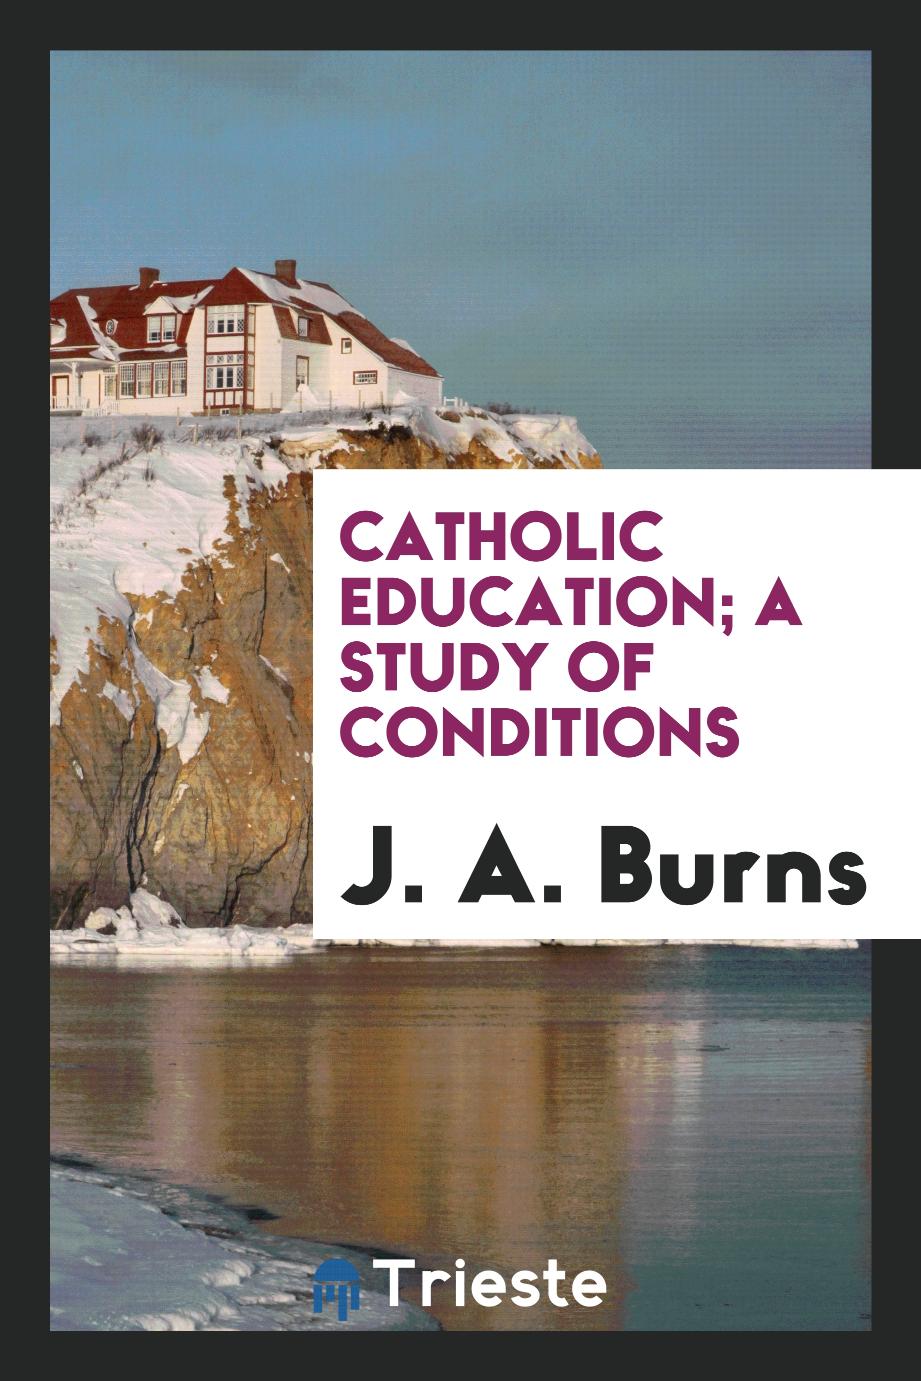 Catholic education; a study of conditions